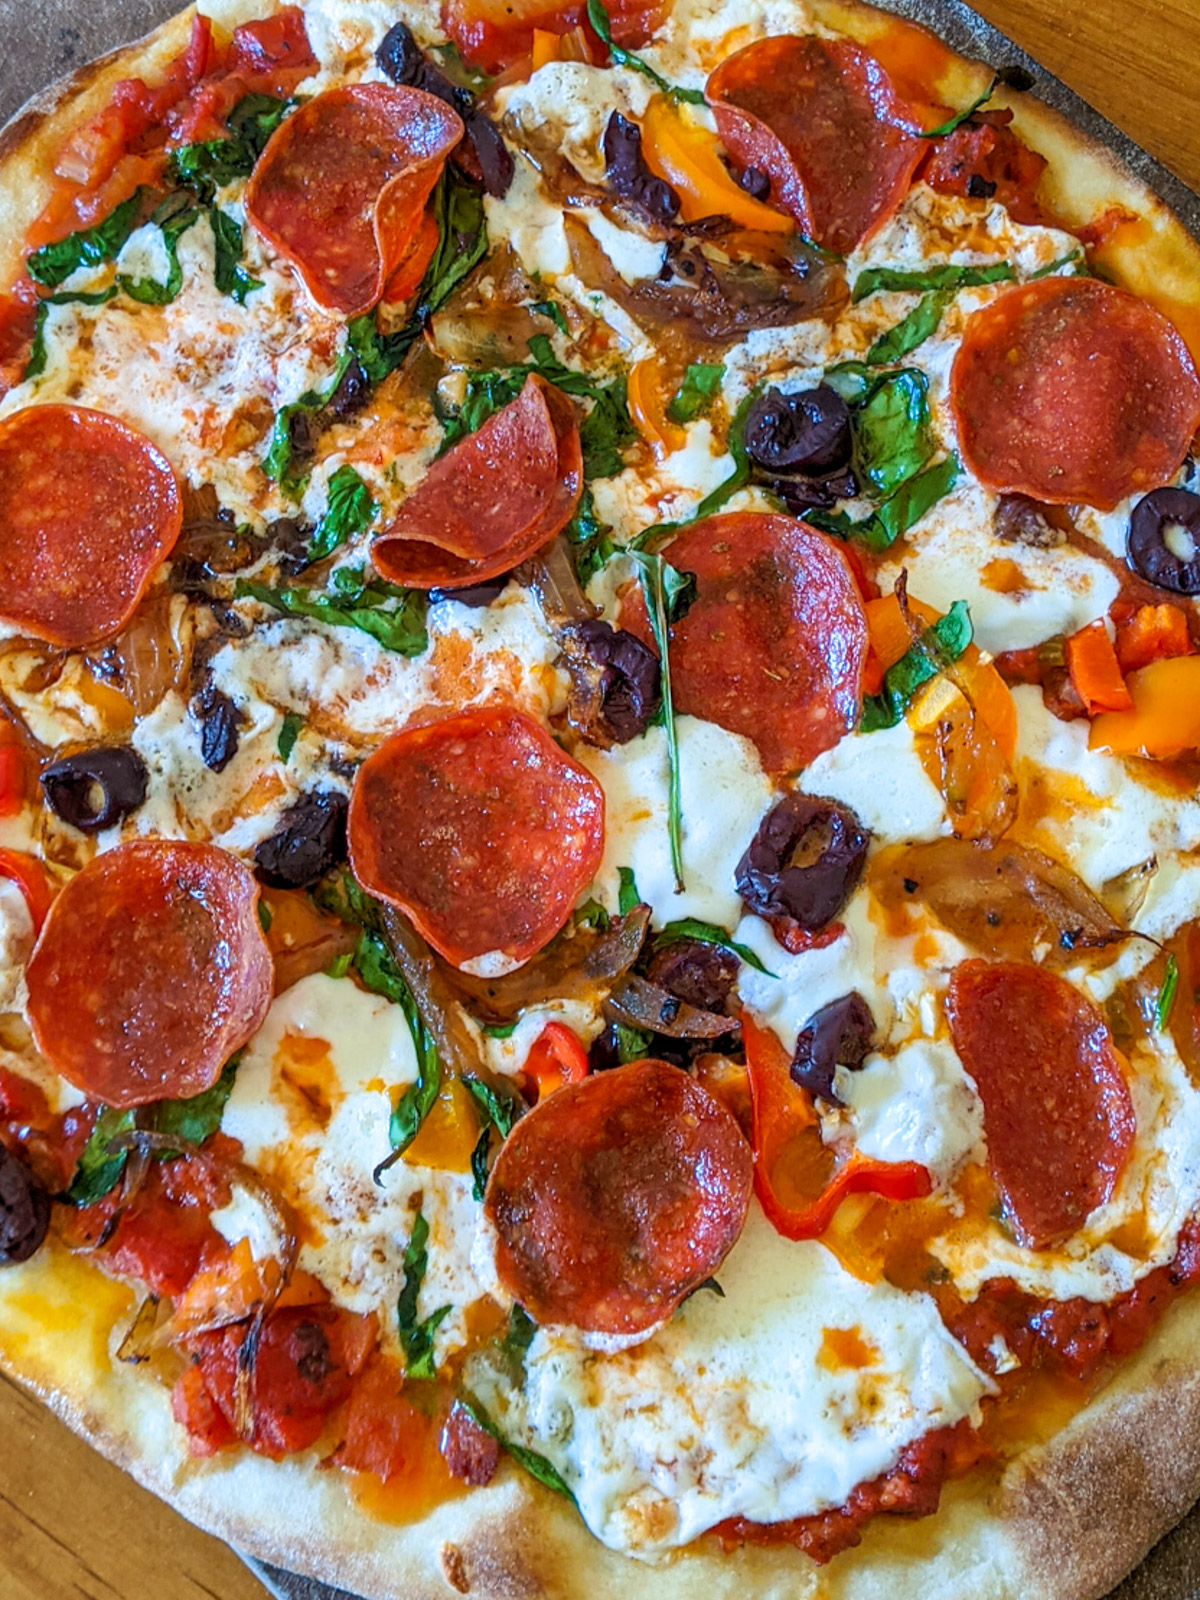 Pepperoni pizza with mozzarella cheese, olives and veggies.